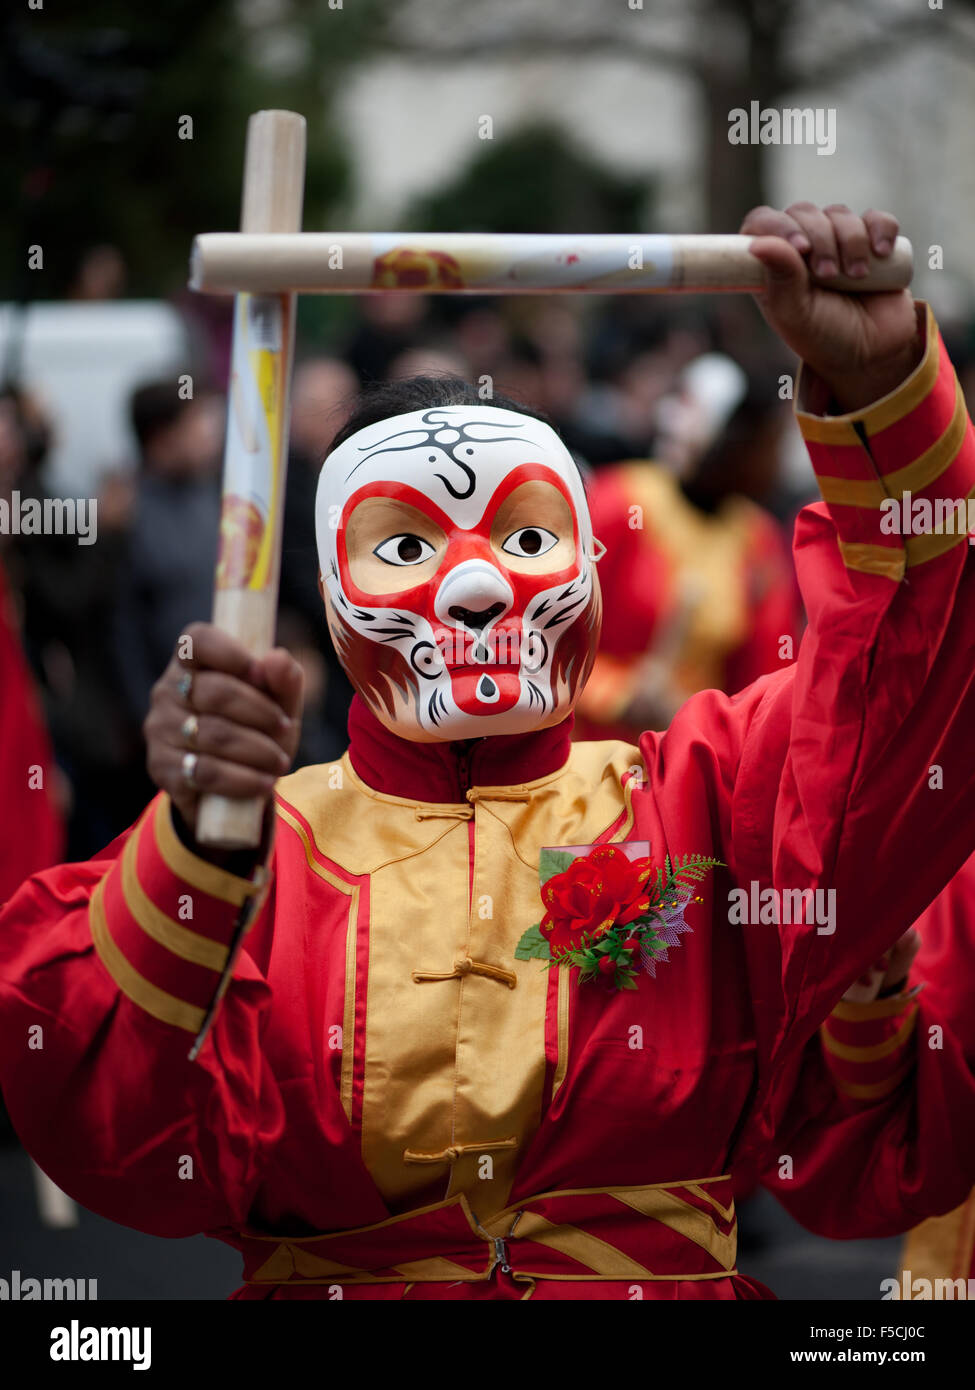 Paris, France - Feb 6, 2011: Chinese performer wearing a monkey mask in traditional costume at the chinese lunar new year parade Stock Photo